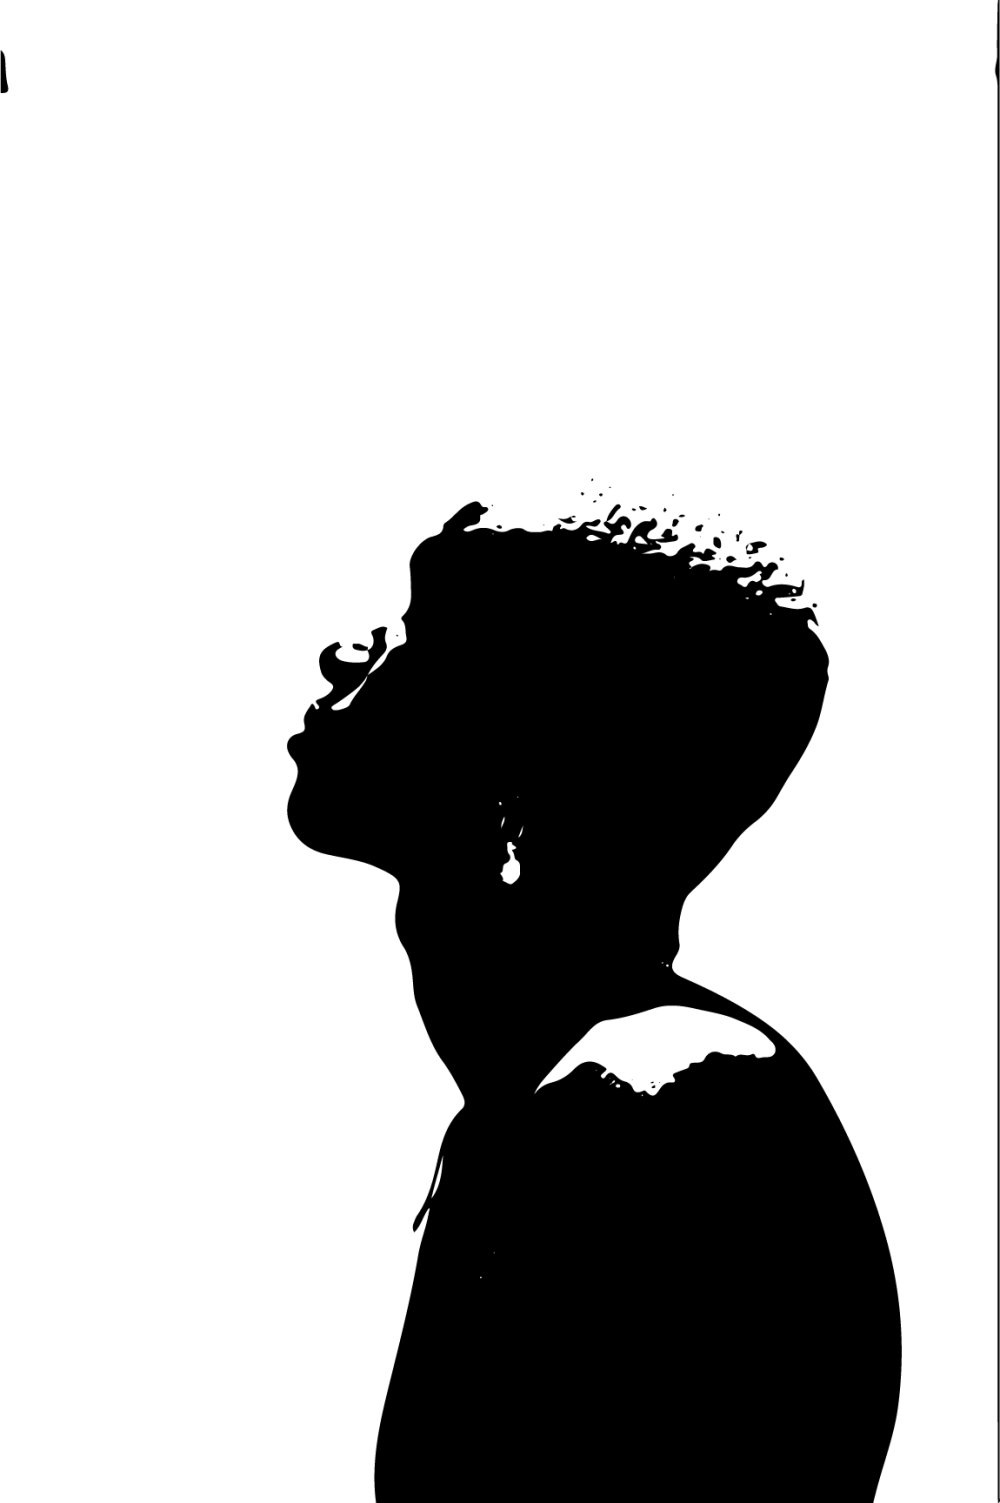 Black illustration of someone's head from the side